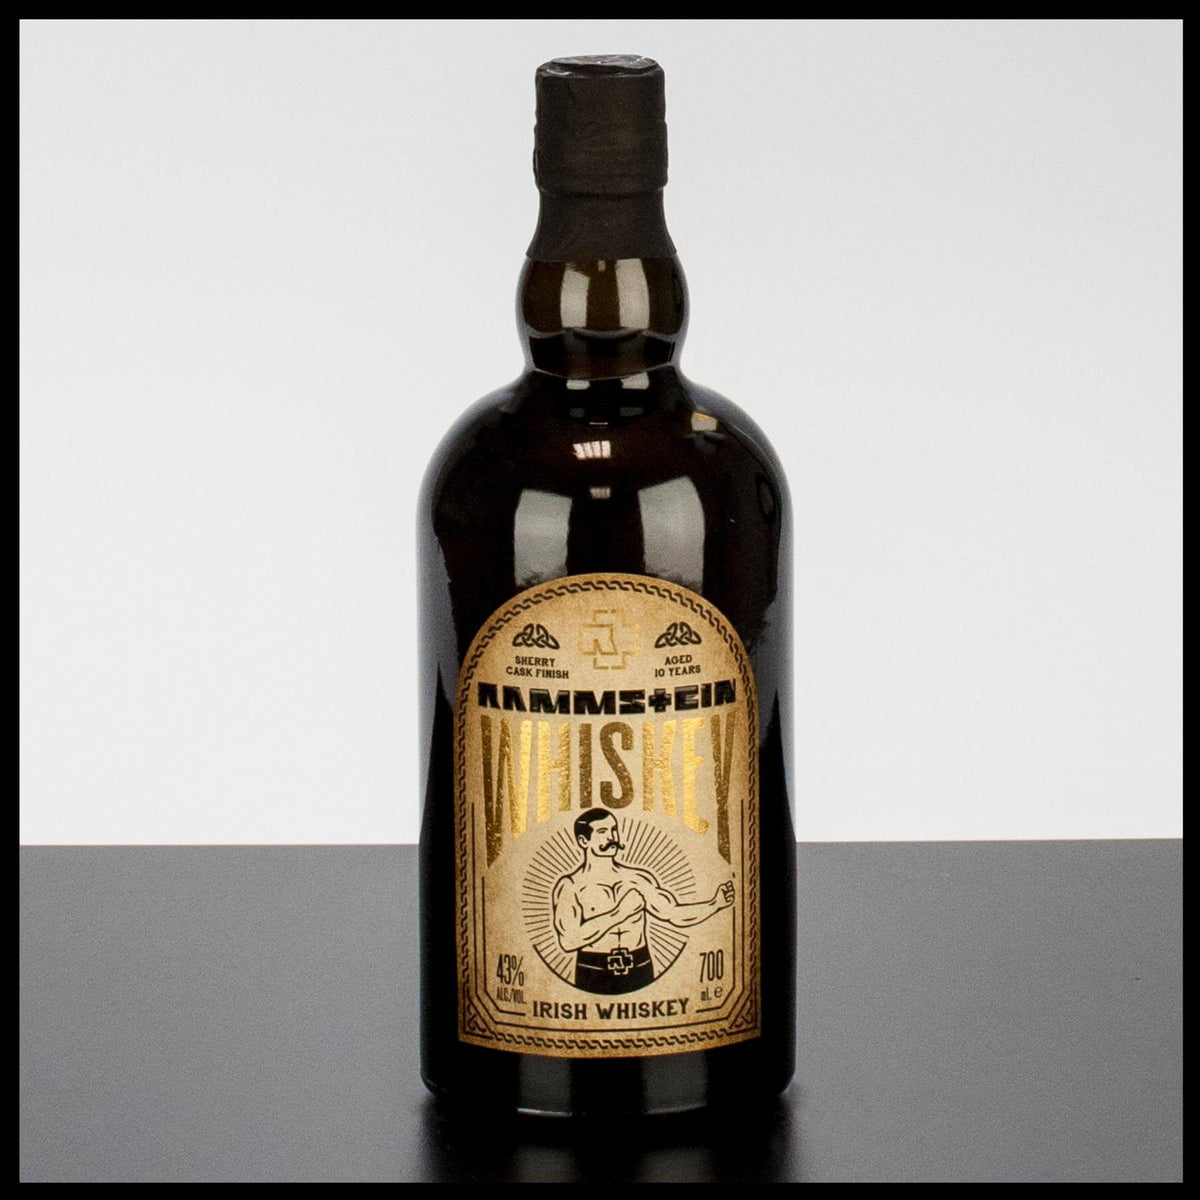 Rammstein Rum - Special Limited Sherry Edition 0,7L (46% Vol.)